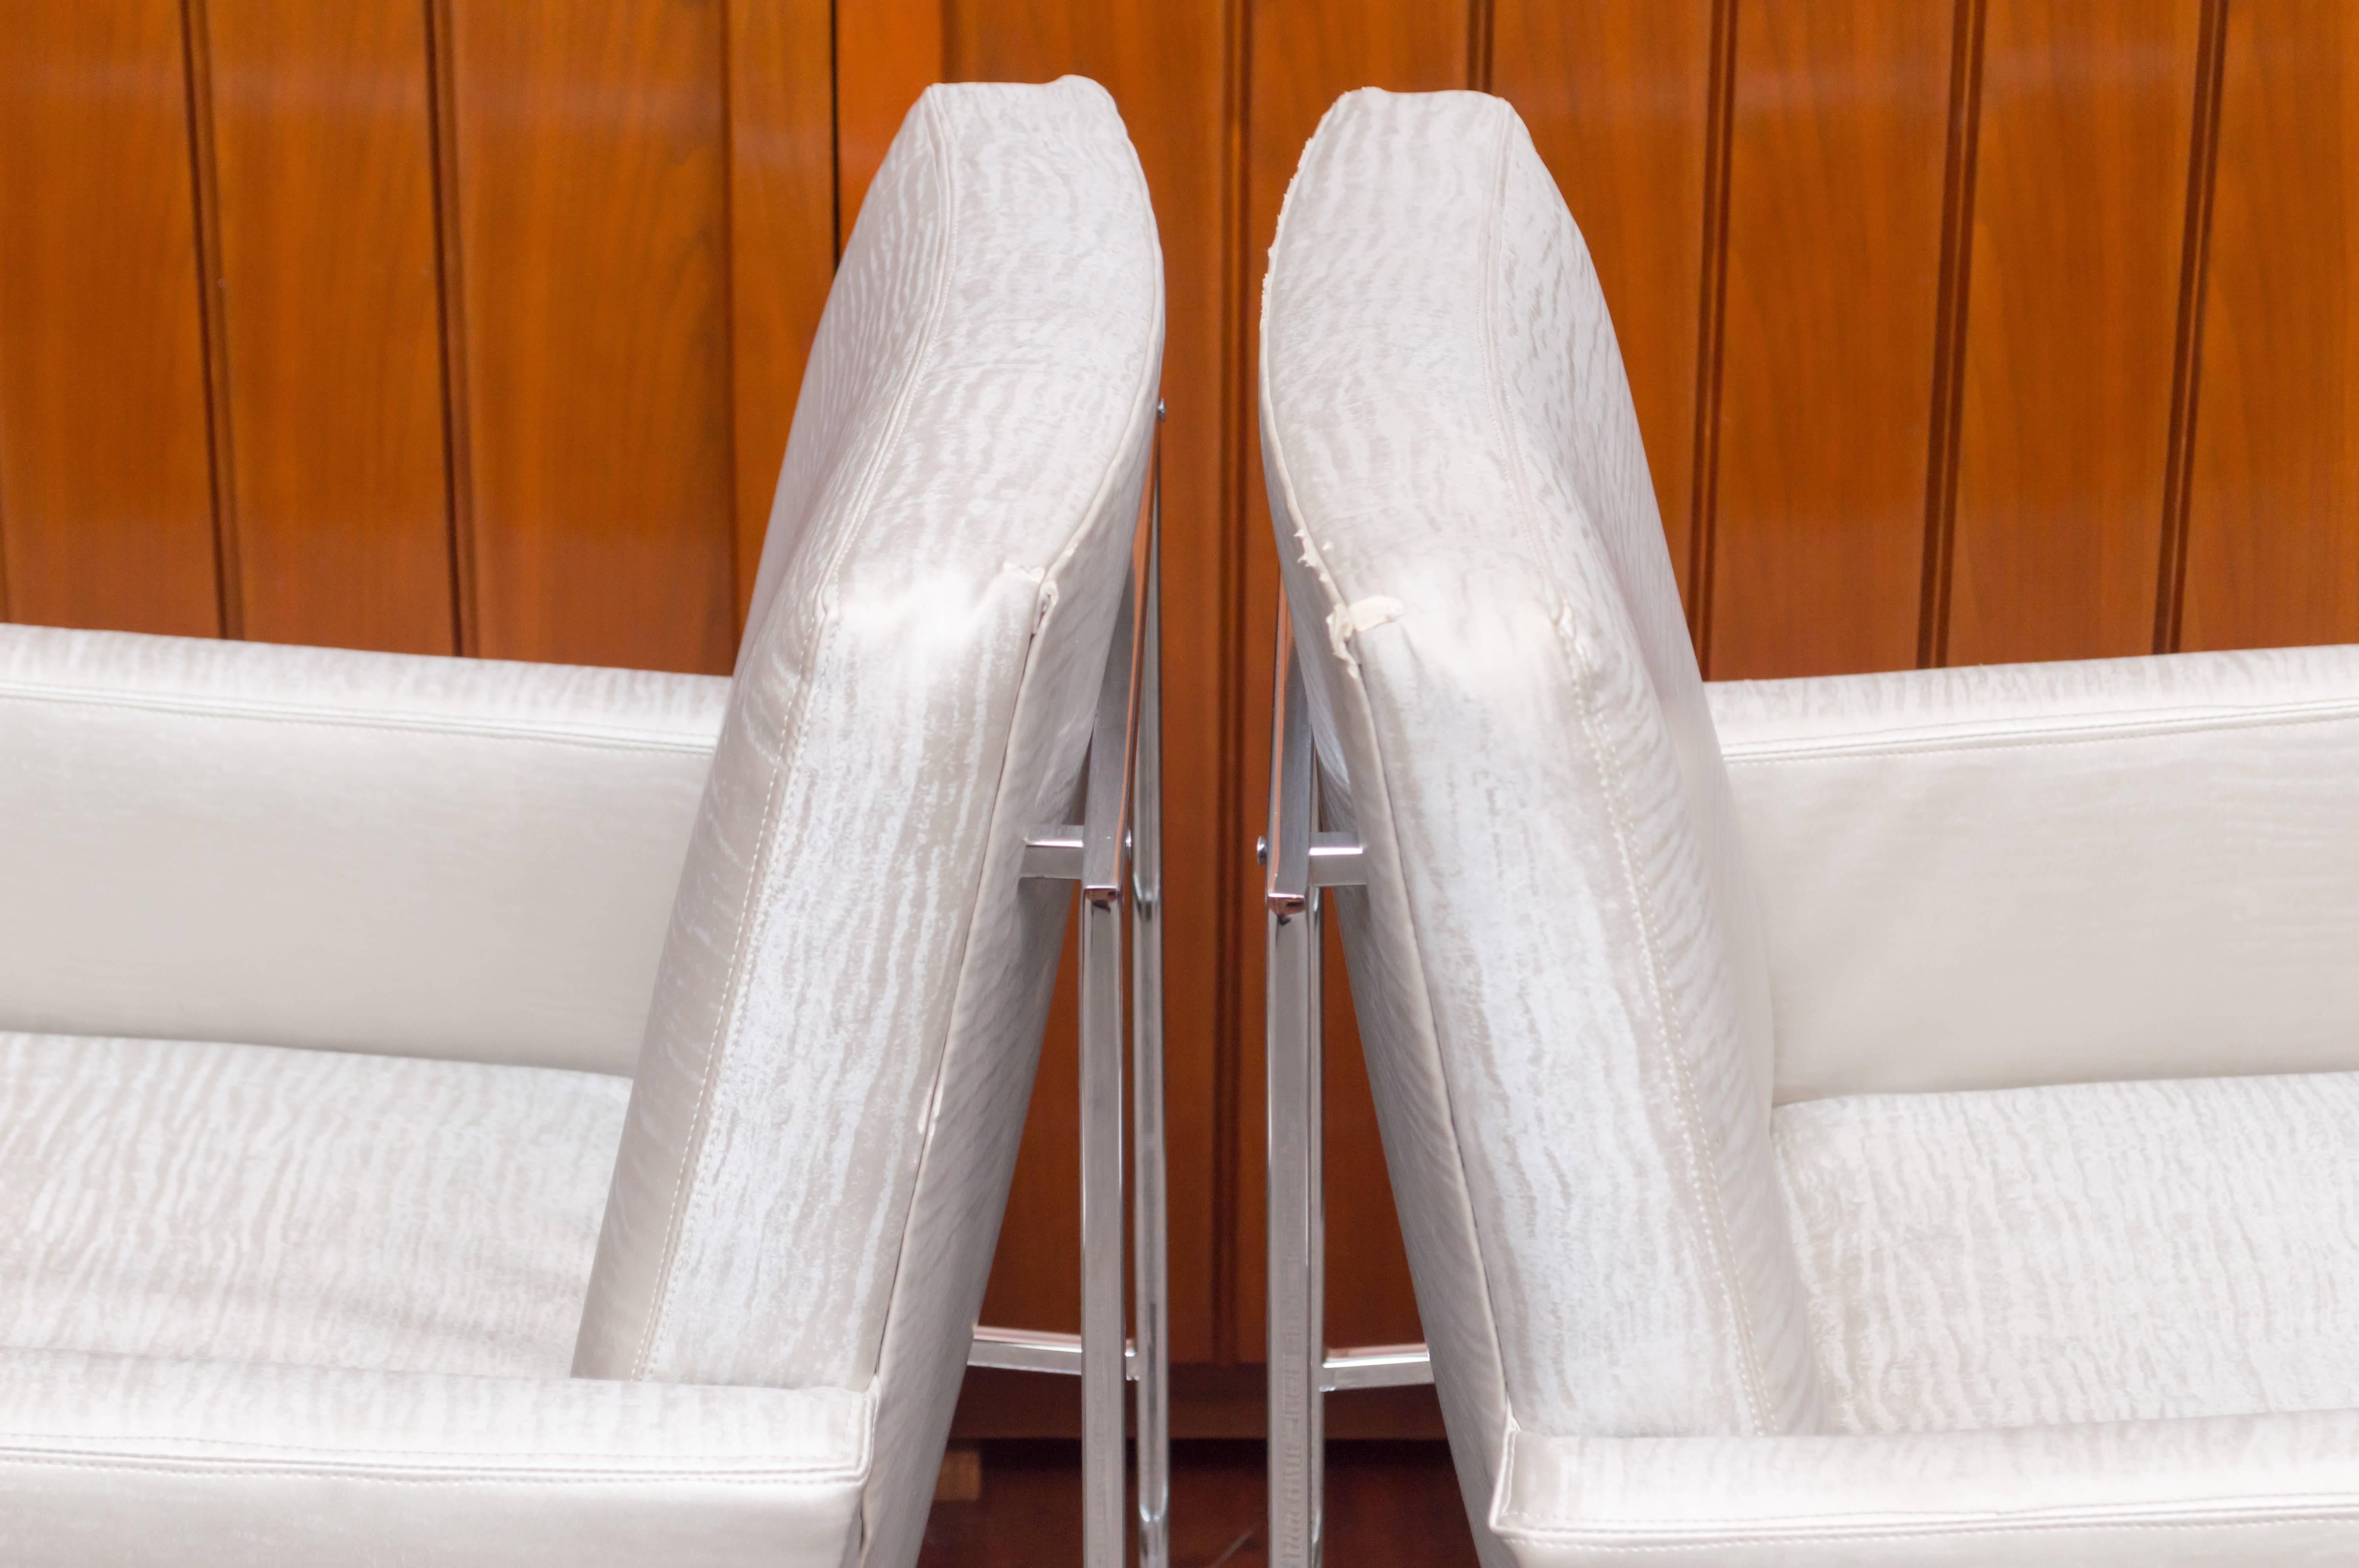 Pair of Milo Baughman design chrome and upholstered armchairs for Thayer Coggin. These chairs can be used as head chairs at a dining table or in a living room setting.